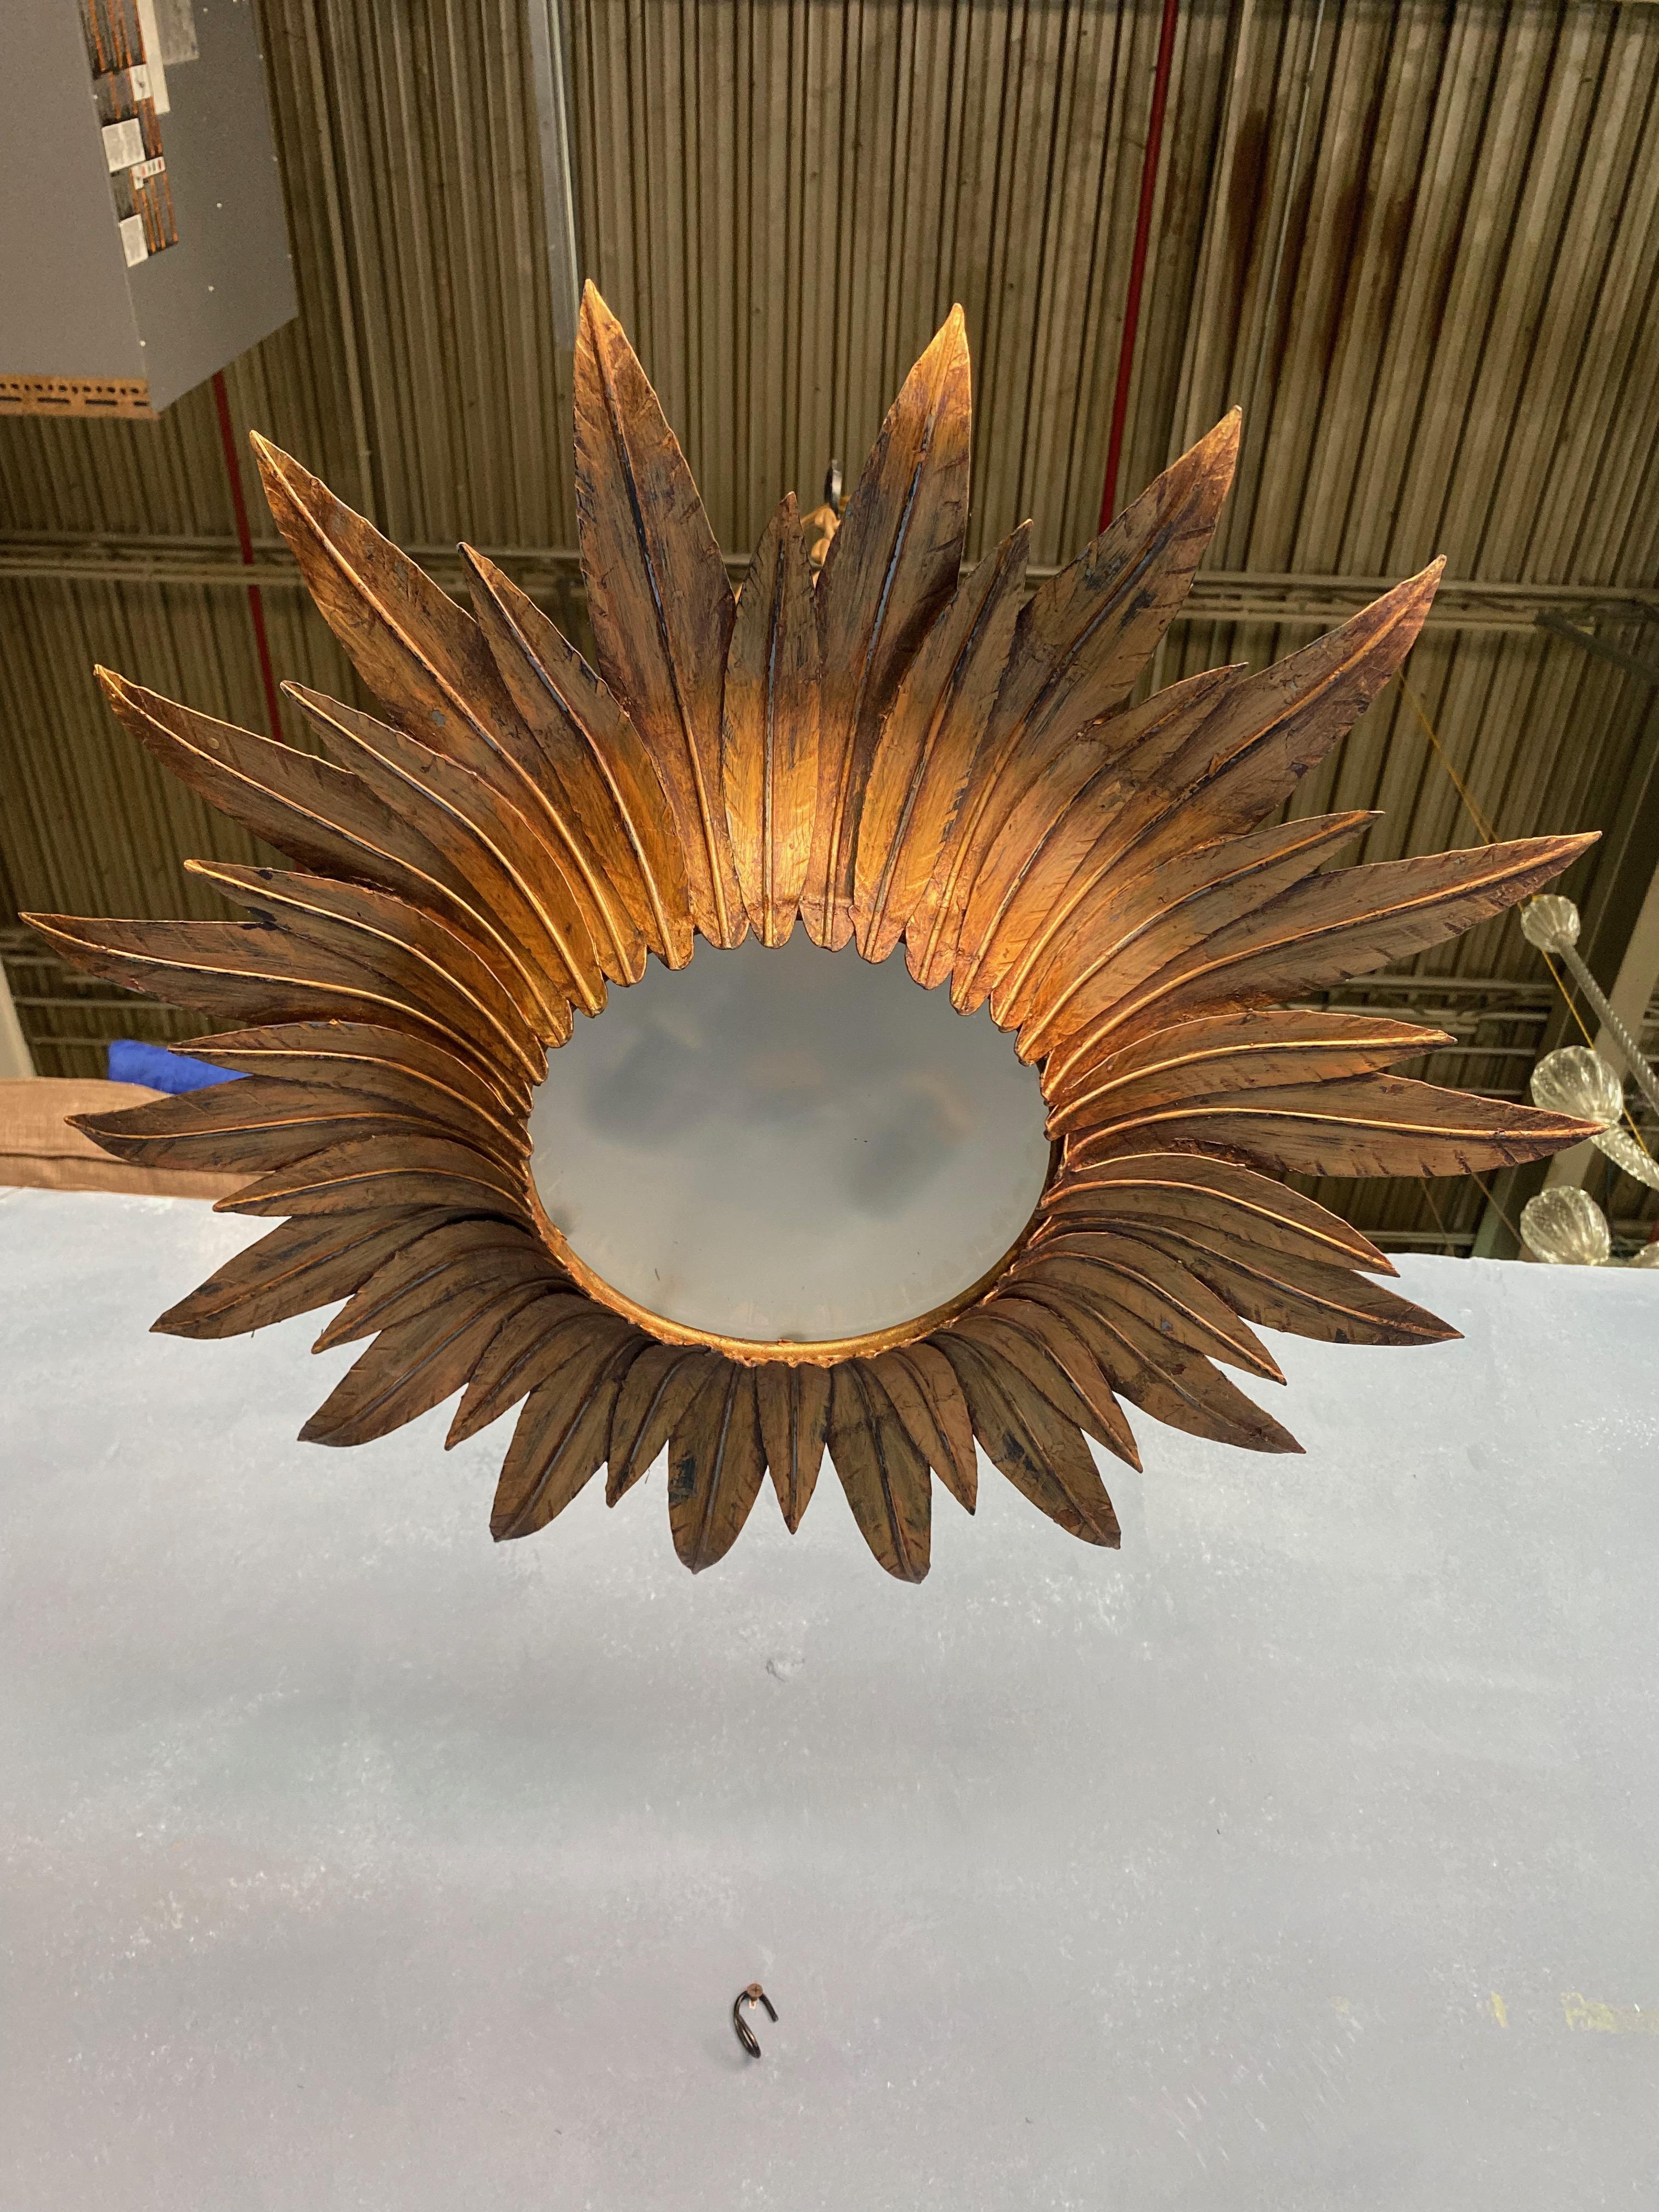 This impressive flush mount ceiling fixture, originating from Spain in the 1950s, features an intricate design of alternating longer and shorter feathered rays. These rays are closely grouped together, framing a round acid-etched glass diffuser. The